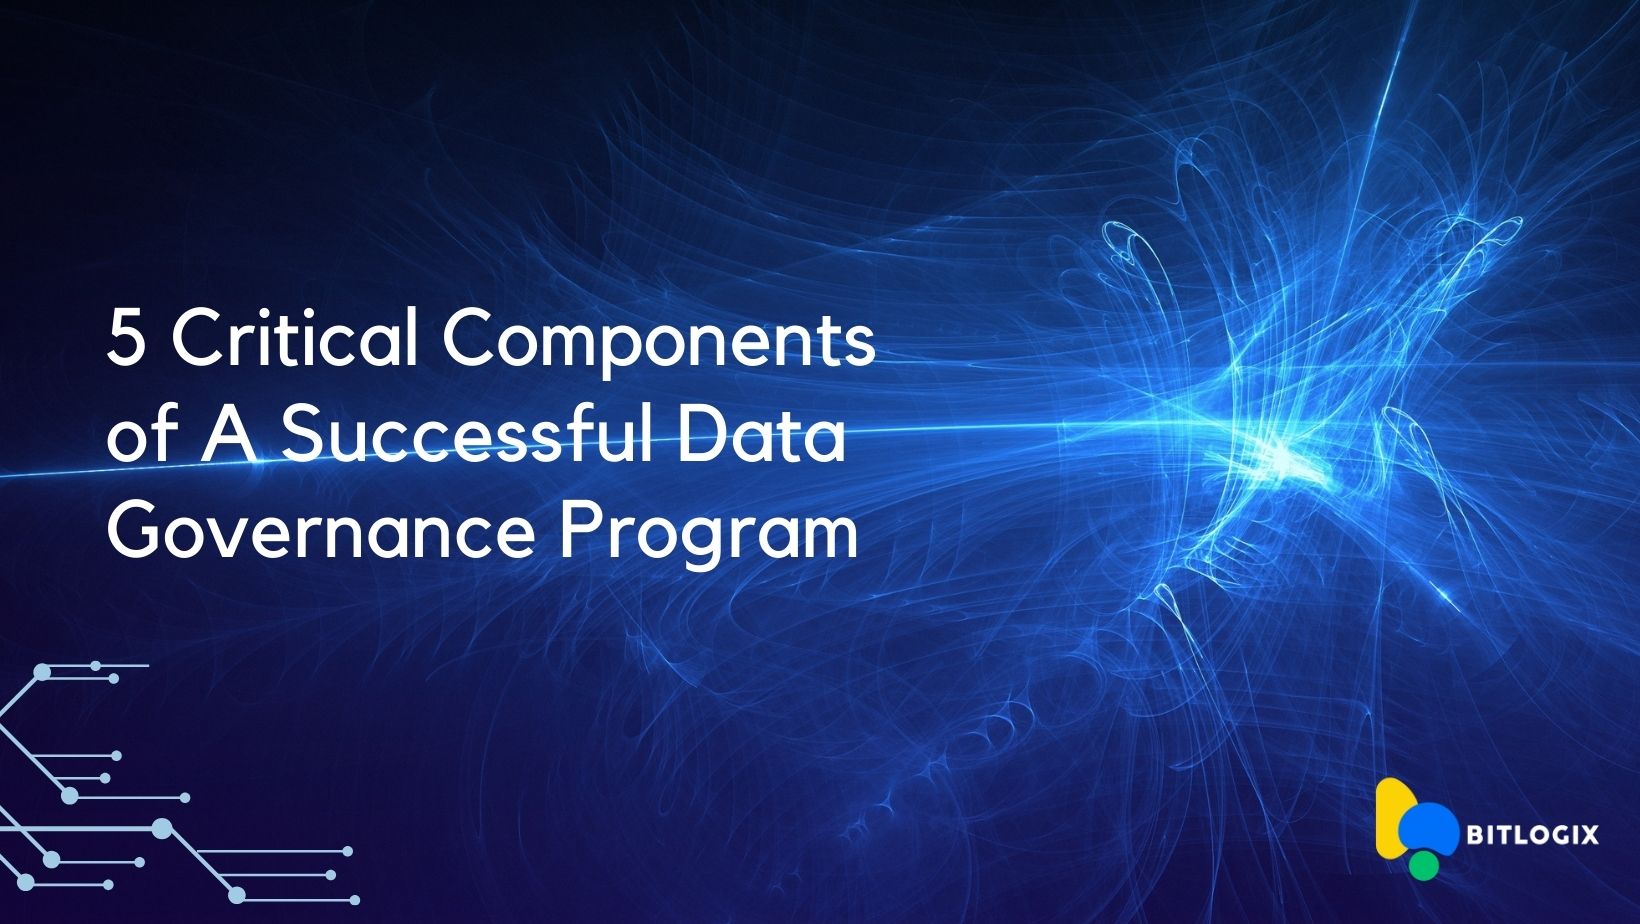 5 Critical Components for a Successful Data Governance Program